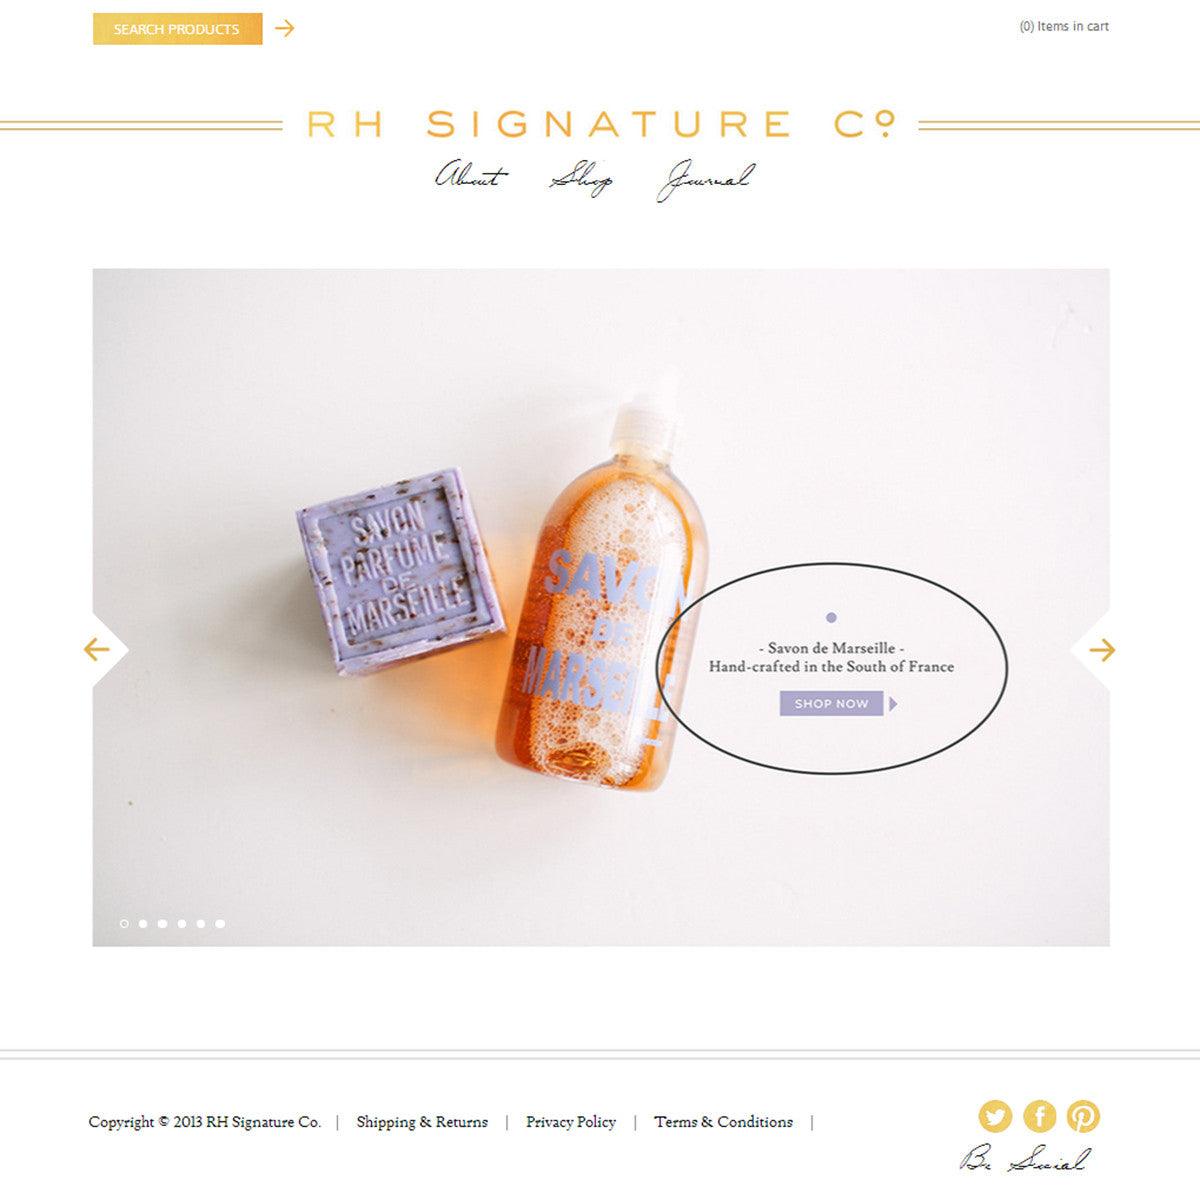 RH Signature - Photography and Web Design - Los Angeles, US based Shopify Experts Revo Designs